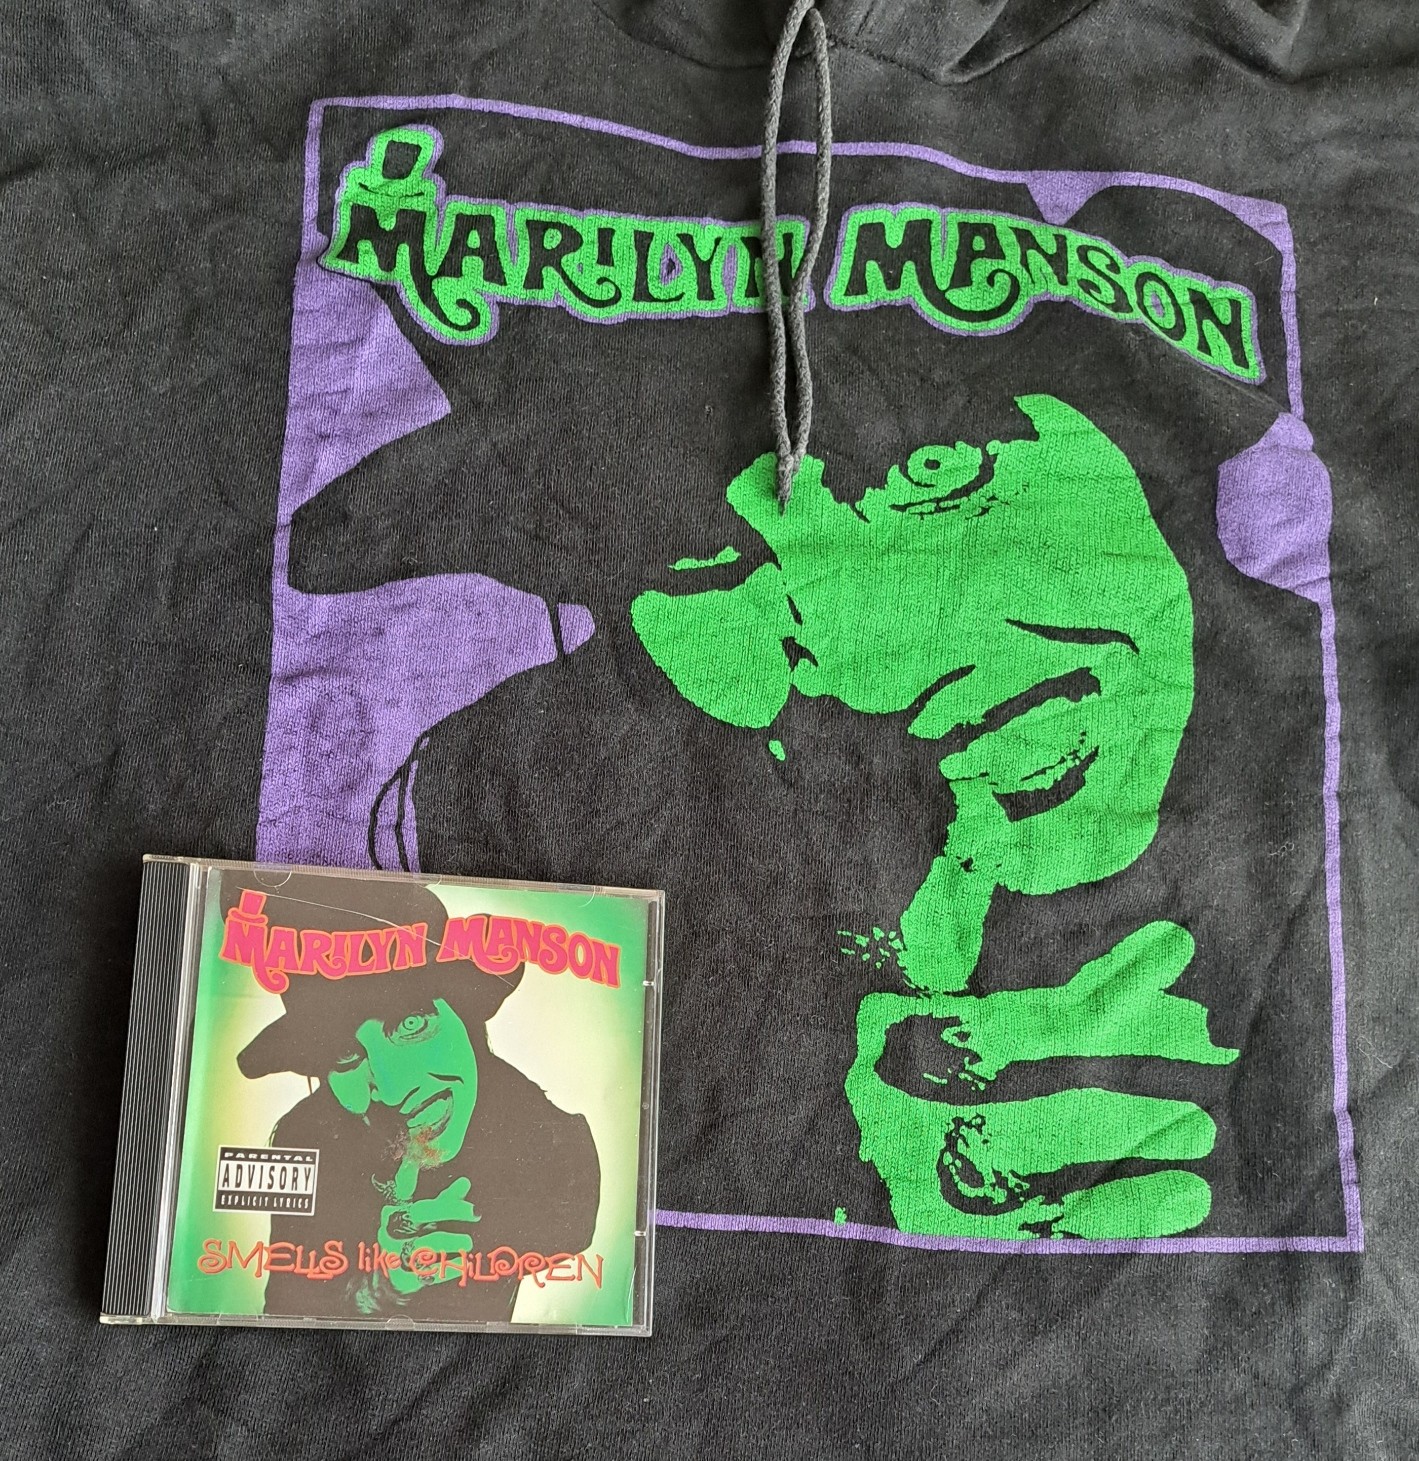 Marilyn Manson's "Smells Like Children" CD and hoodie